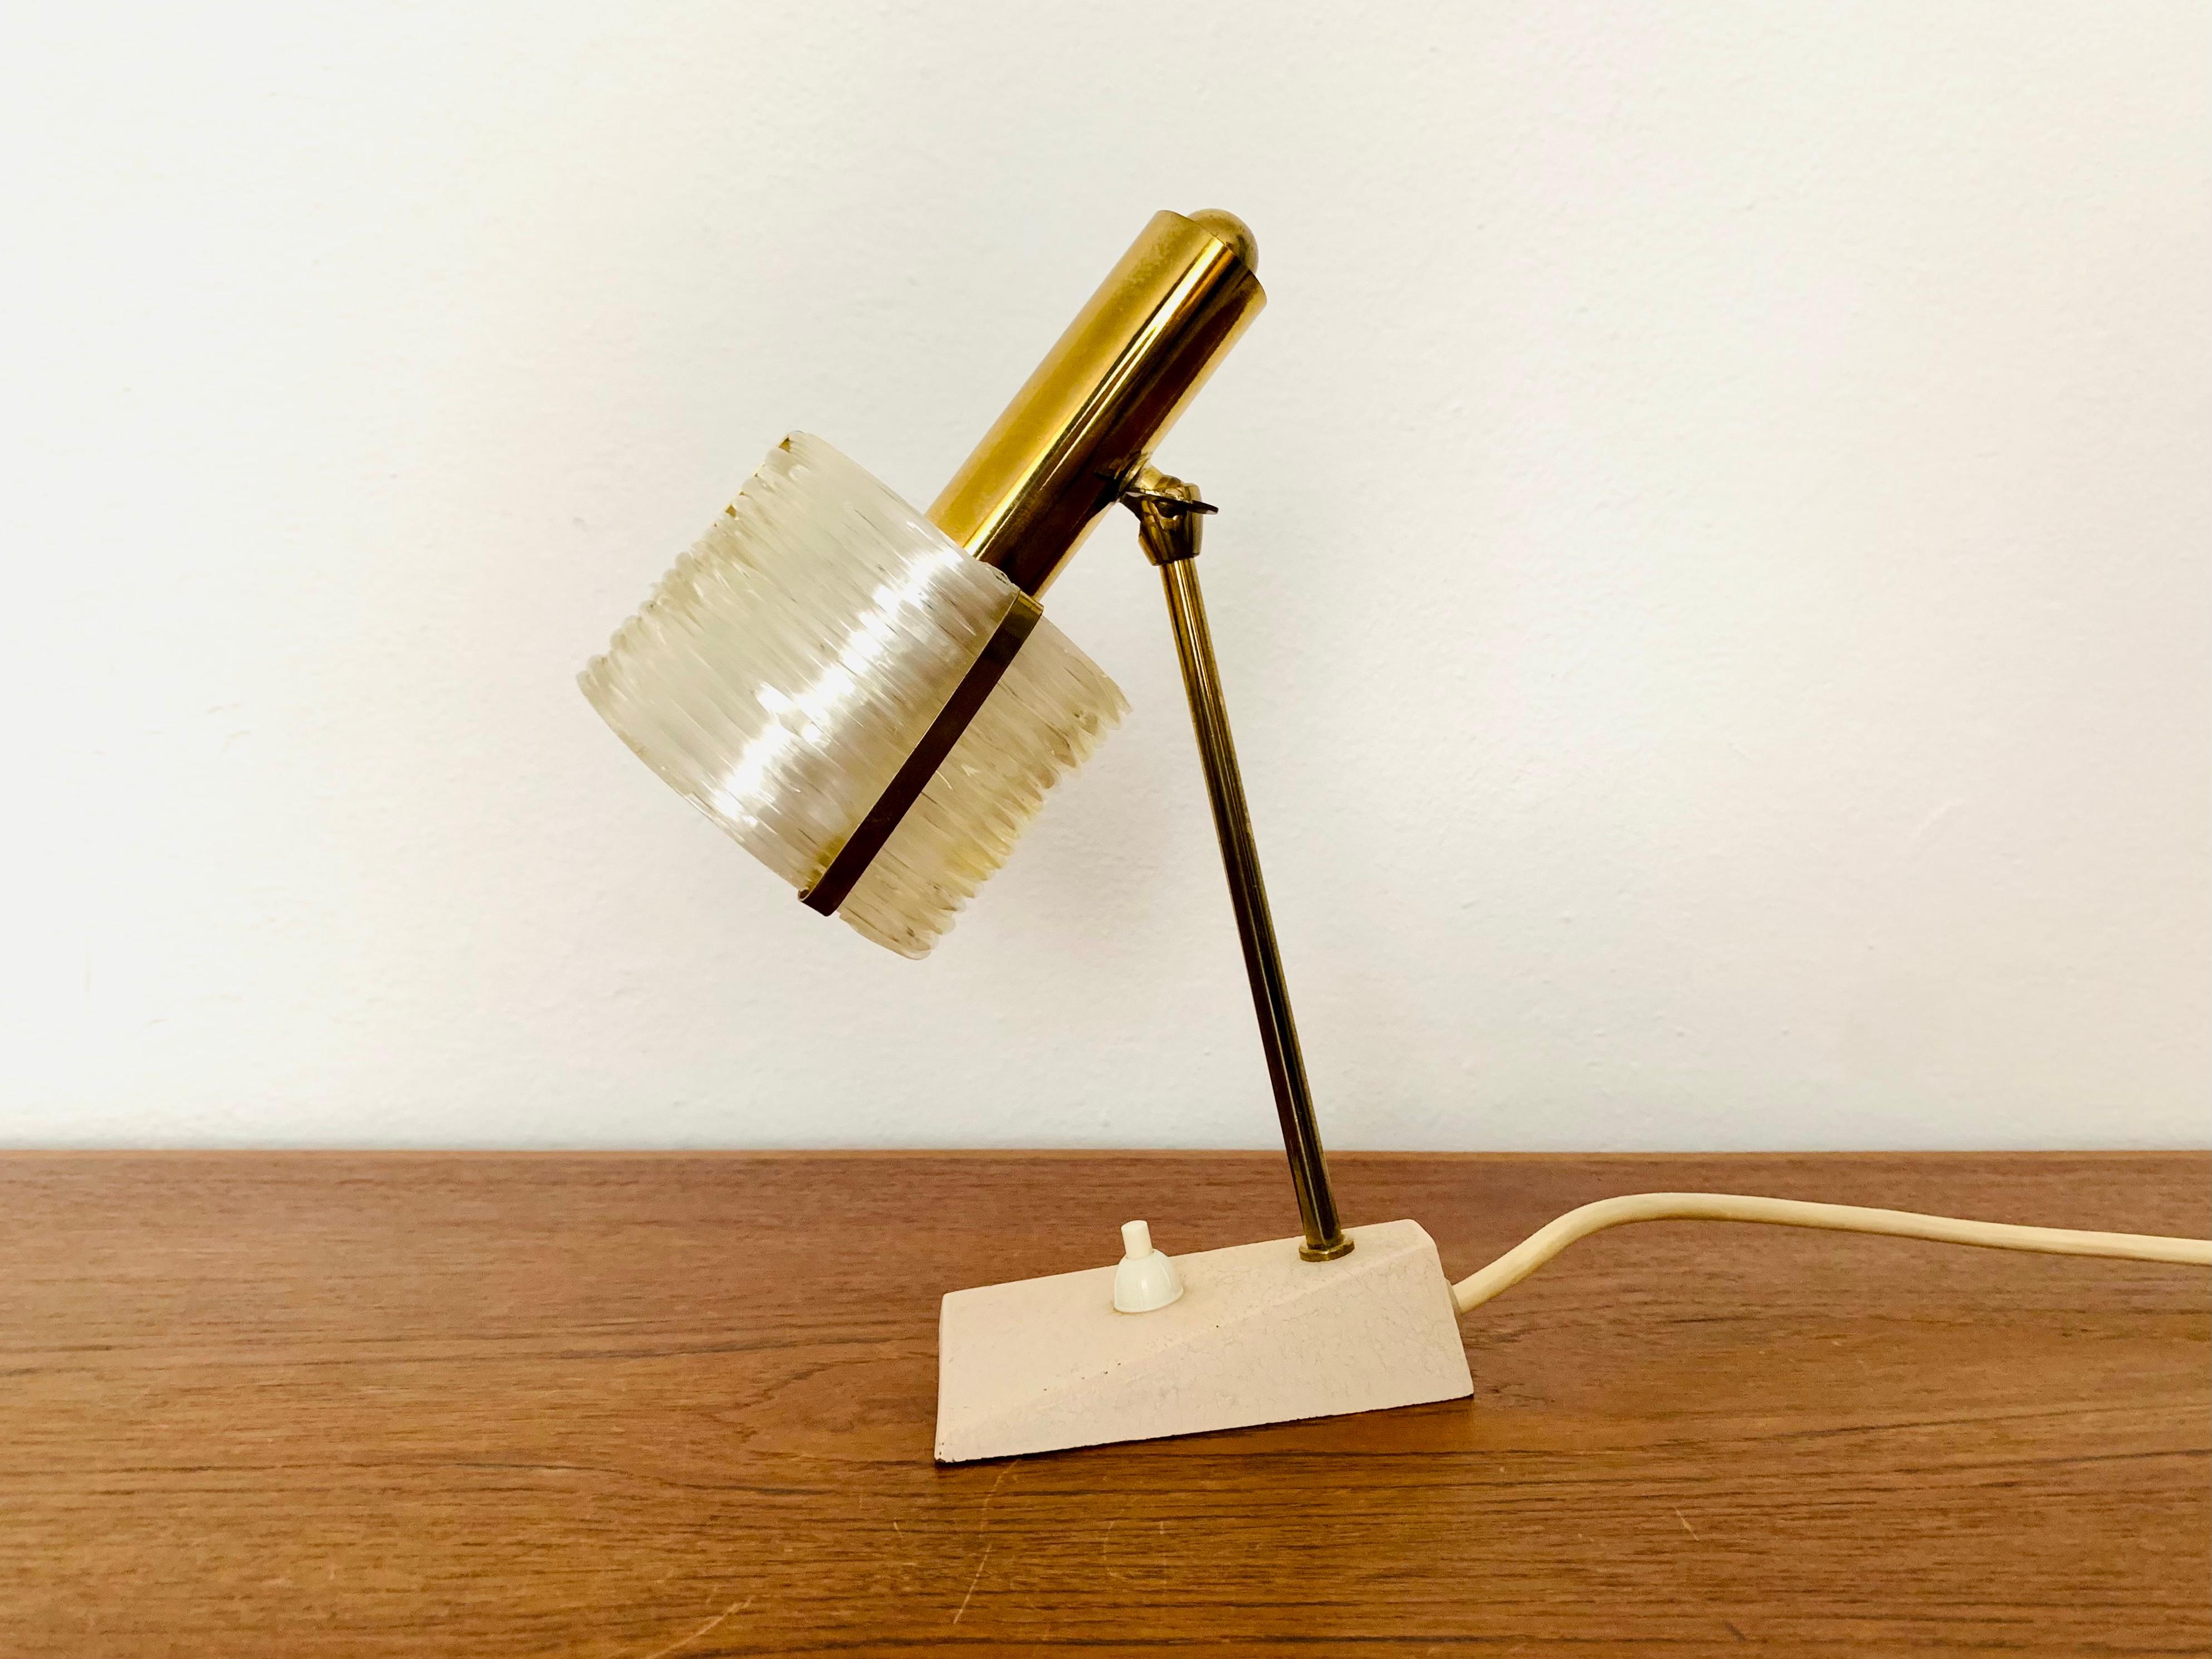 Very nice table lamp from the 1950s.
The extraordinary lampshade spreads a great glamorous and sparkling light.
An absolute eye-catcher in every home.

Condition:

Very good vintage condition with slight signs of wear consistent with age.
A very